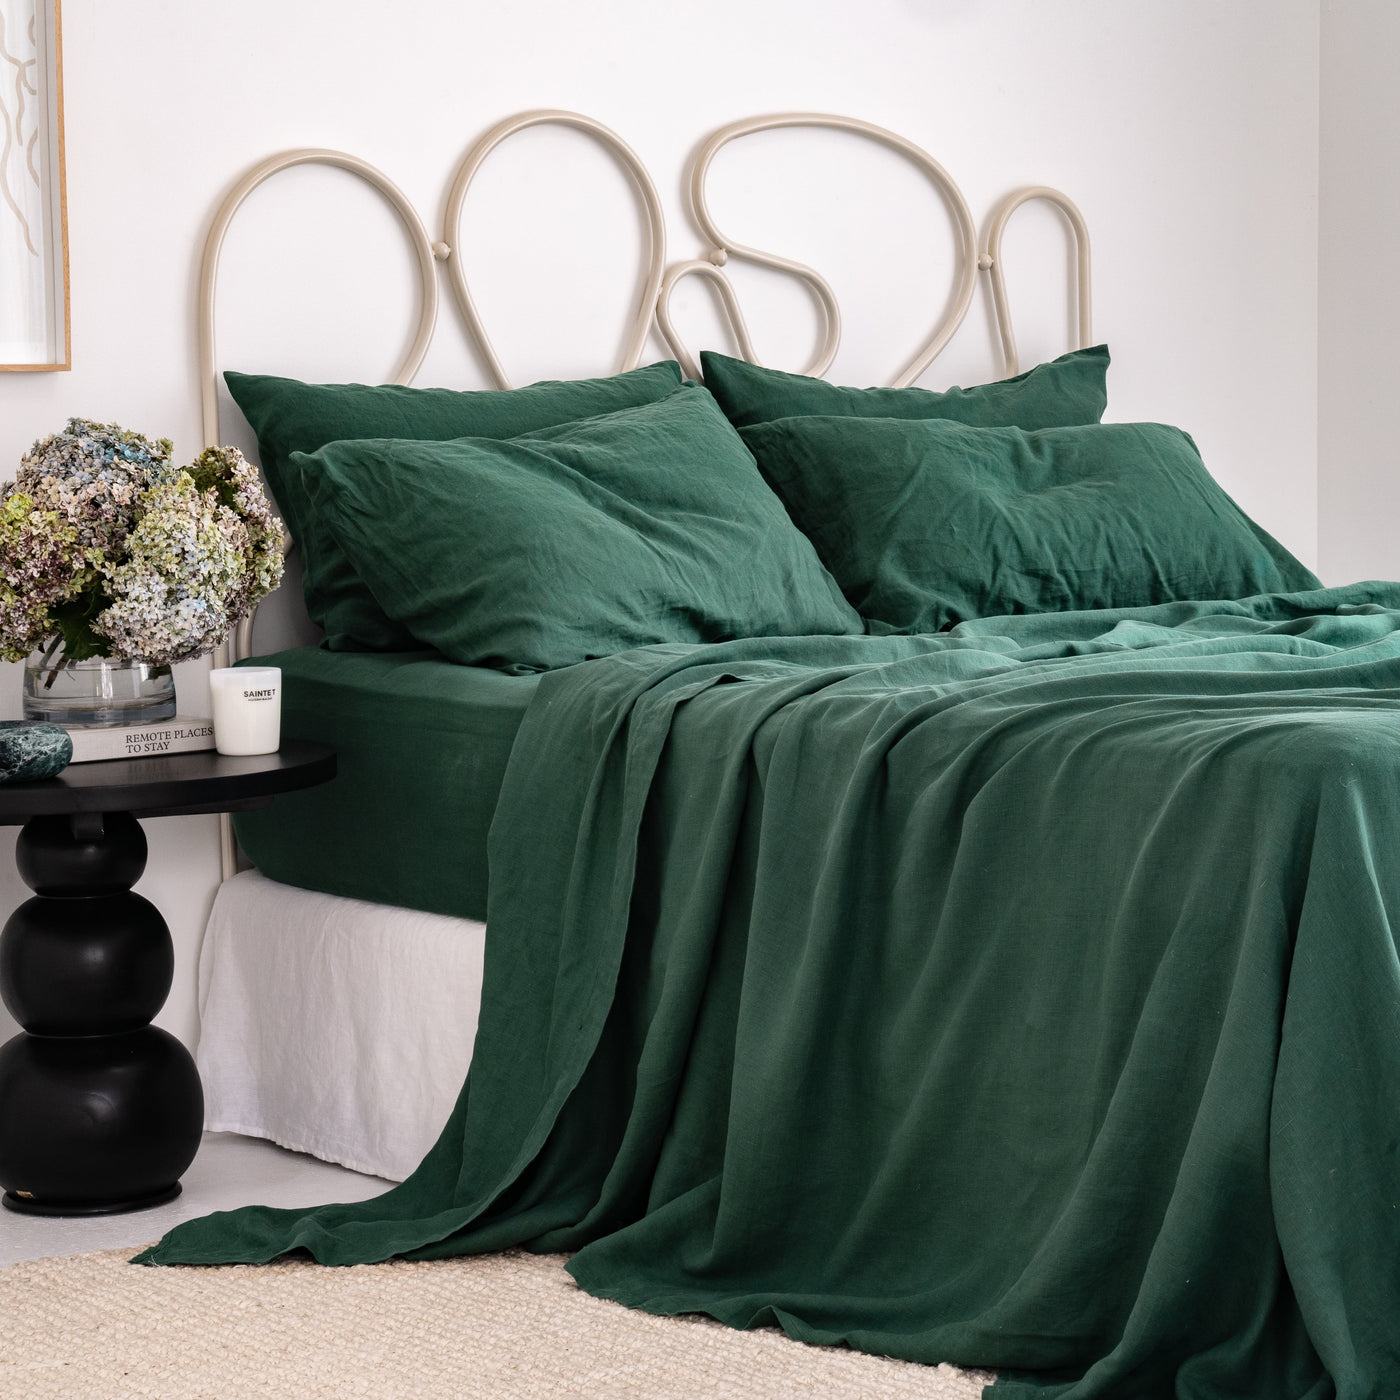 French Flax Linen Flat Sheet in Jade